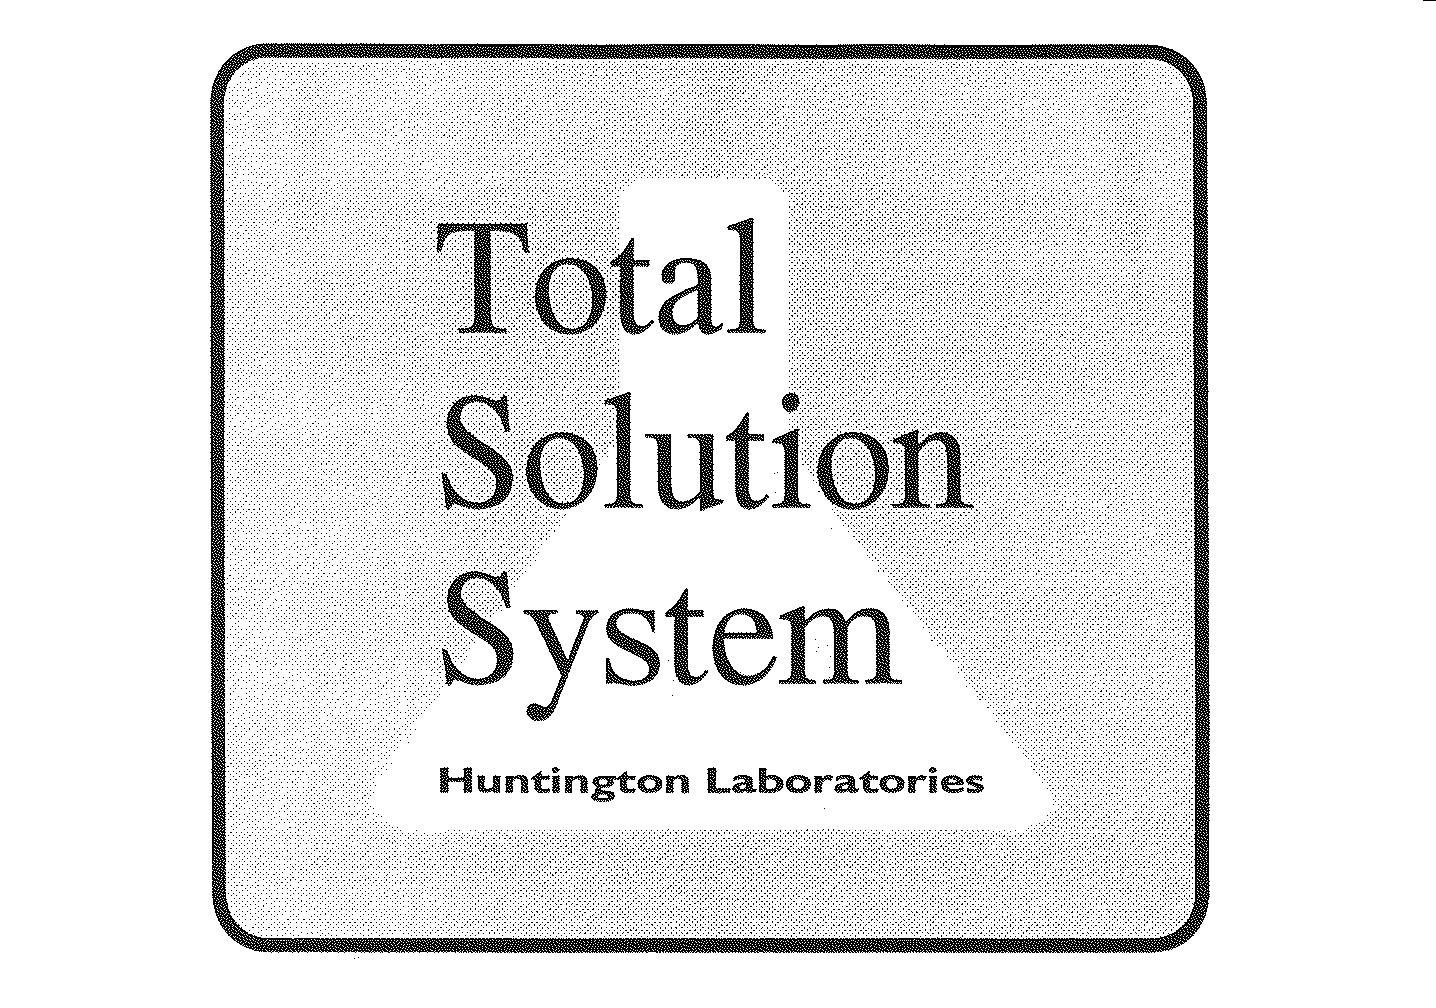  TOTAL SOLUTIONS SYSTEM